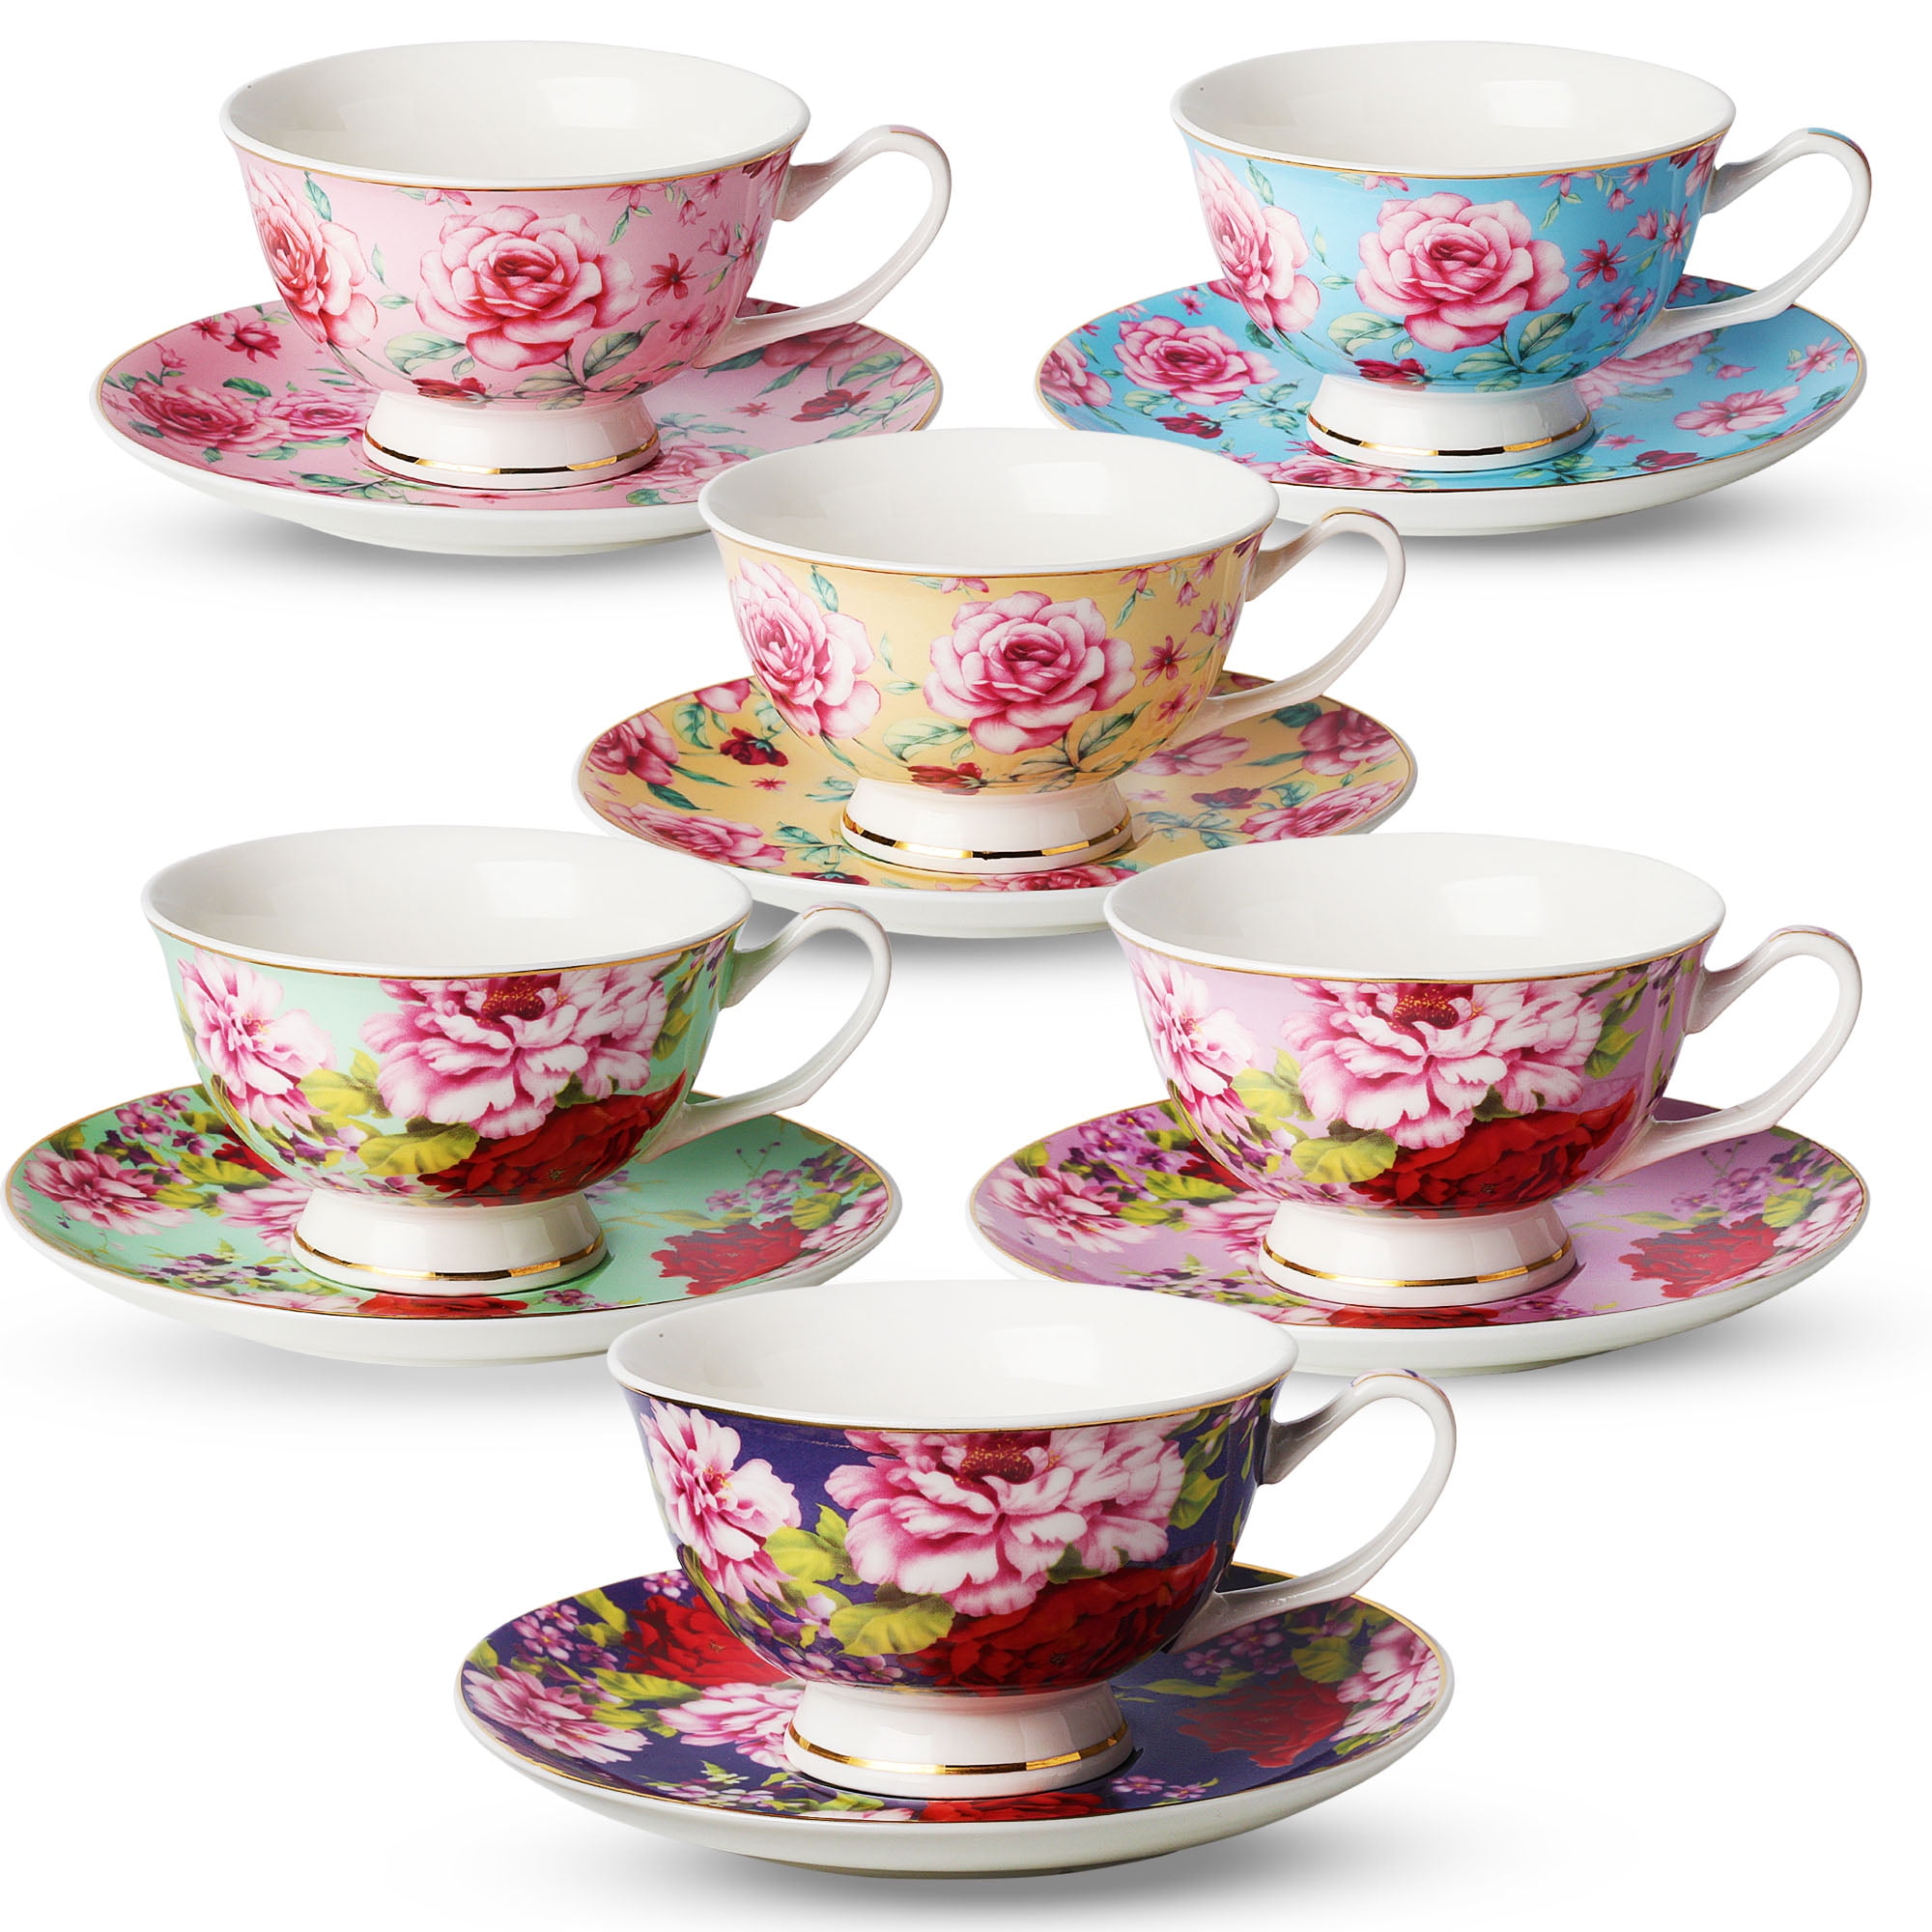 Lynns Fine China Rose Floral Tea Cup And Saucer Set Of 8 Munimoro Gob Pe